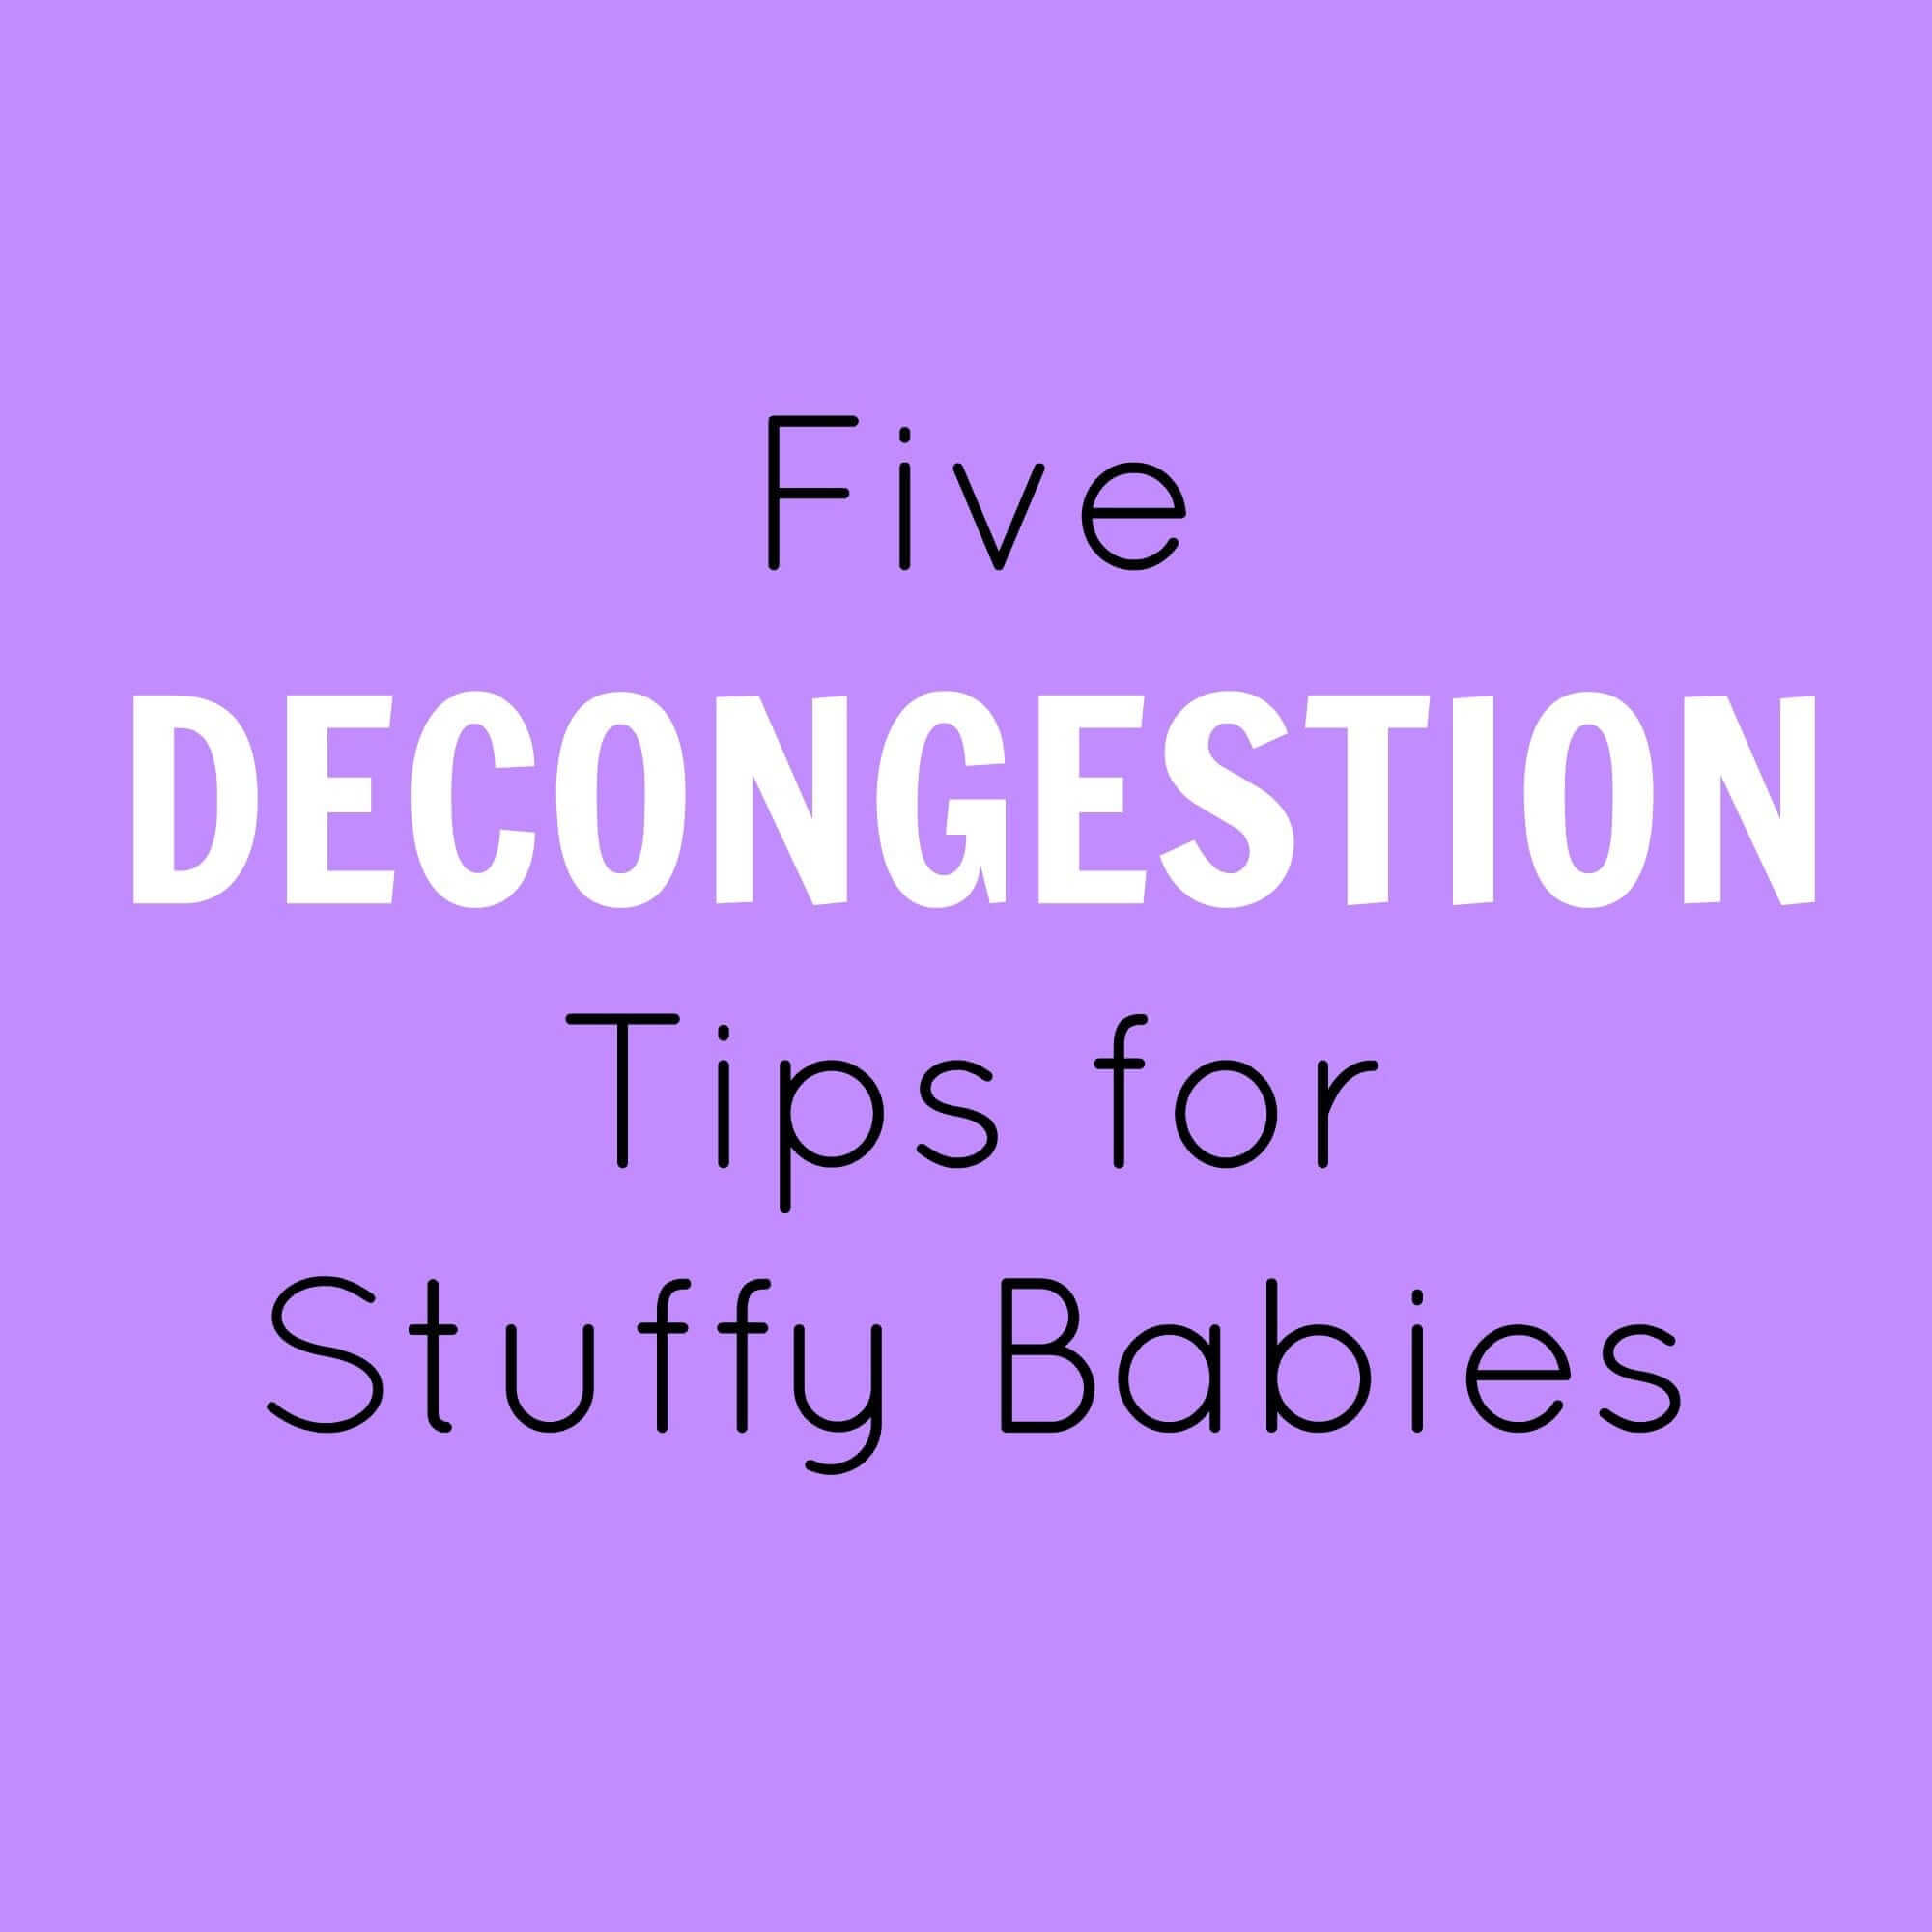 5 Decongestion Tips for Stuffy Babies